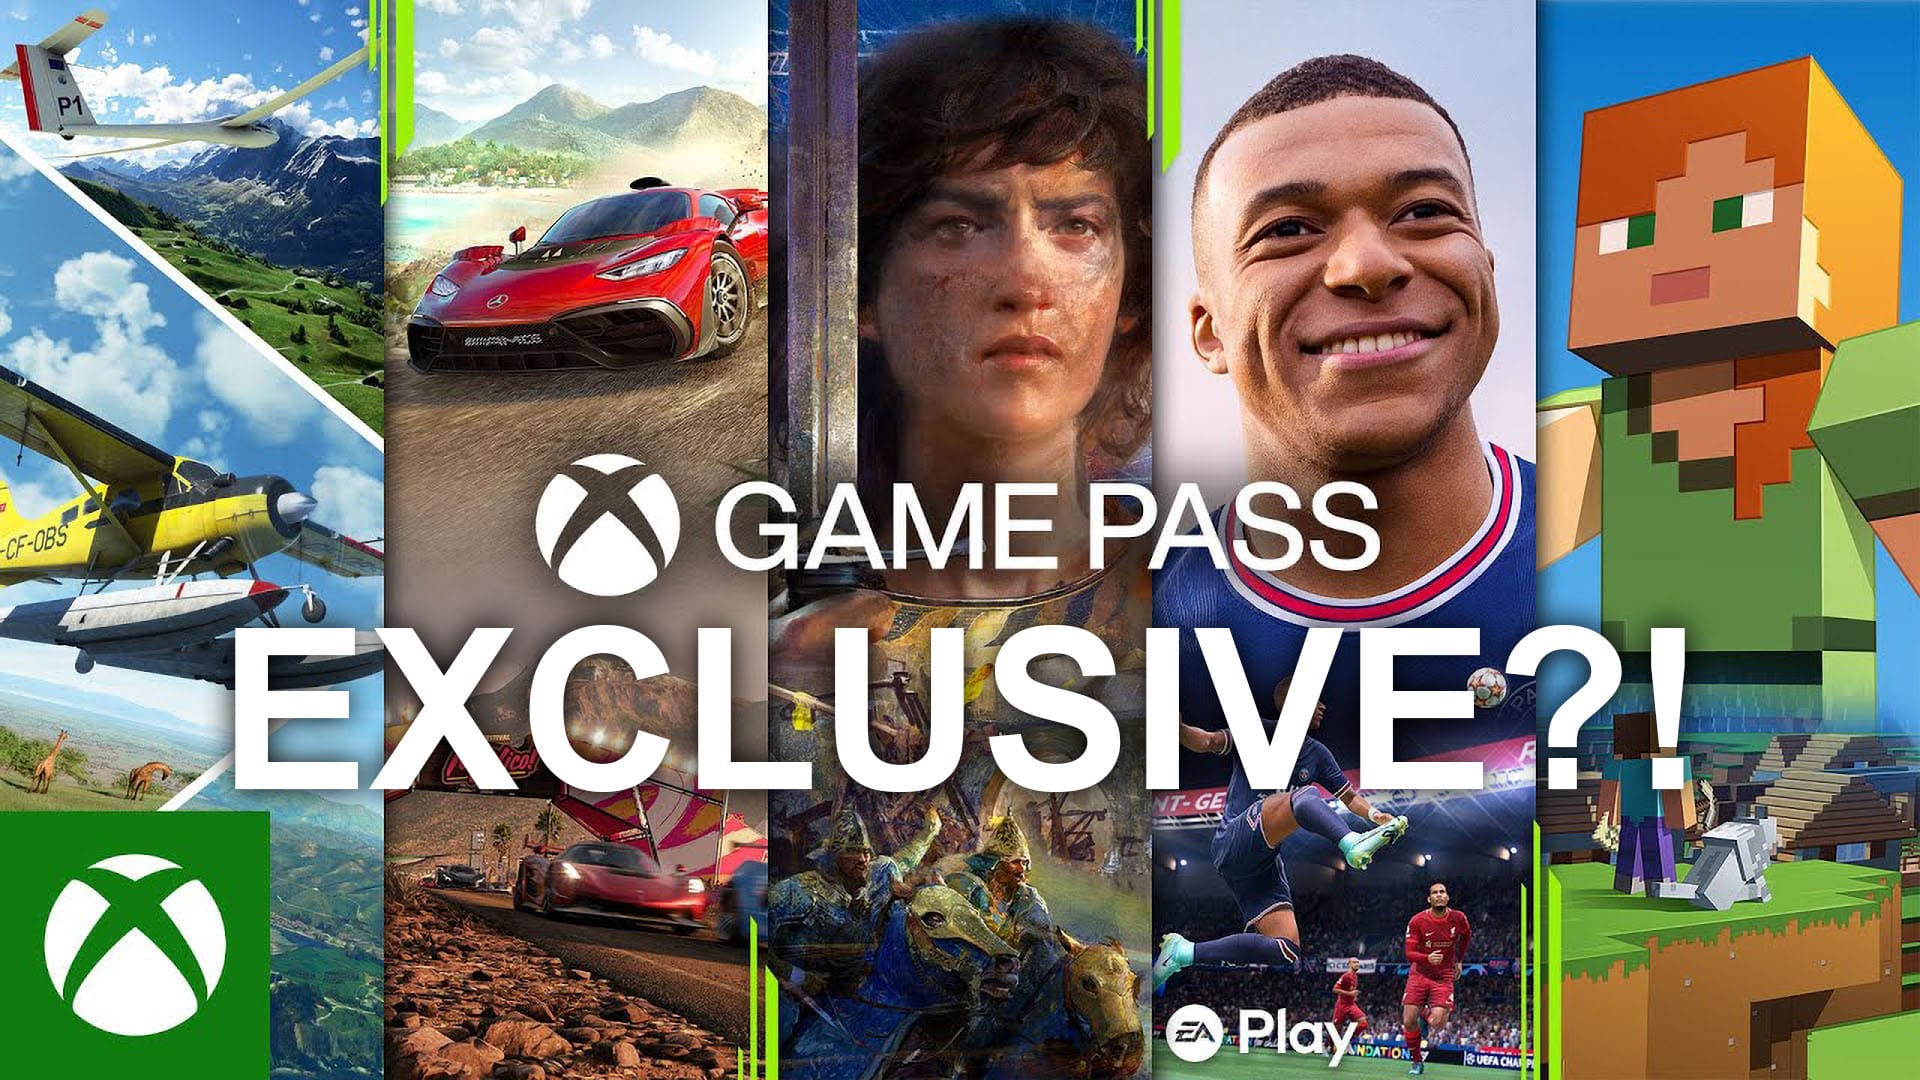 Xbox Game Pass price increase is inevitable, says Phil Spencer